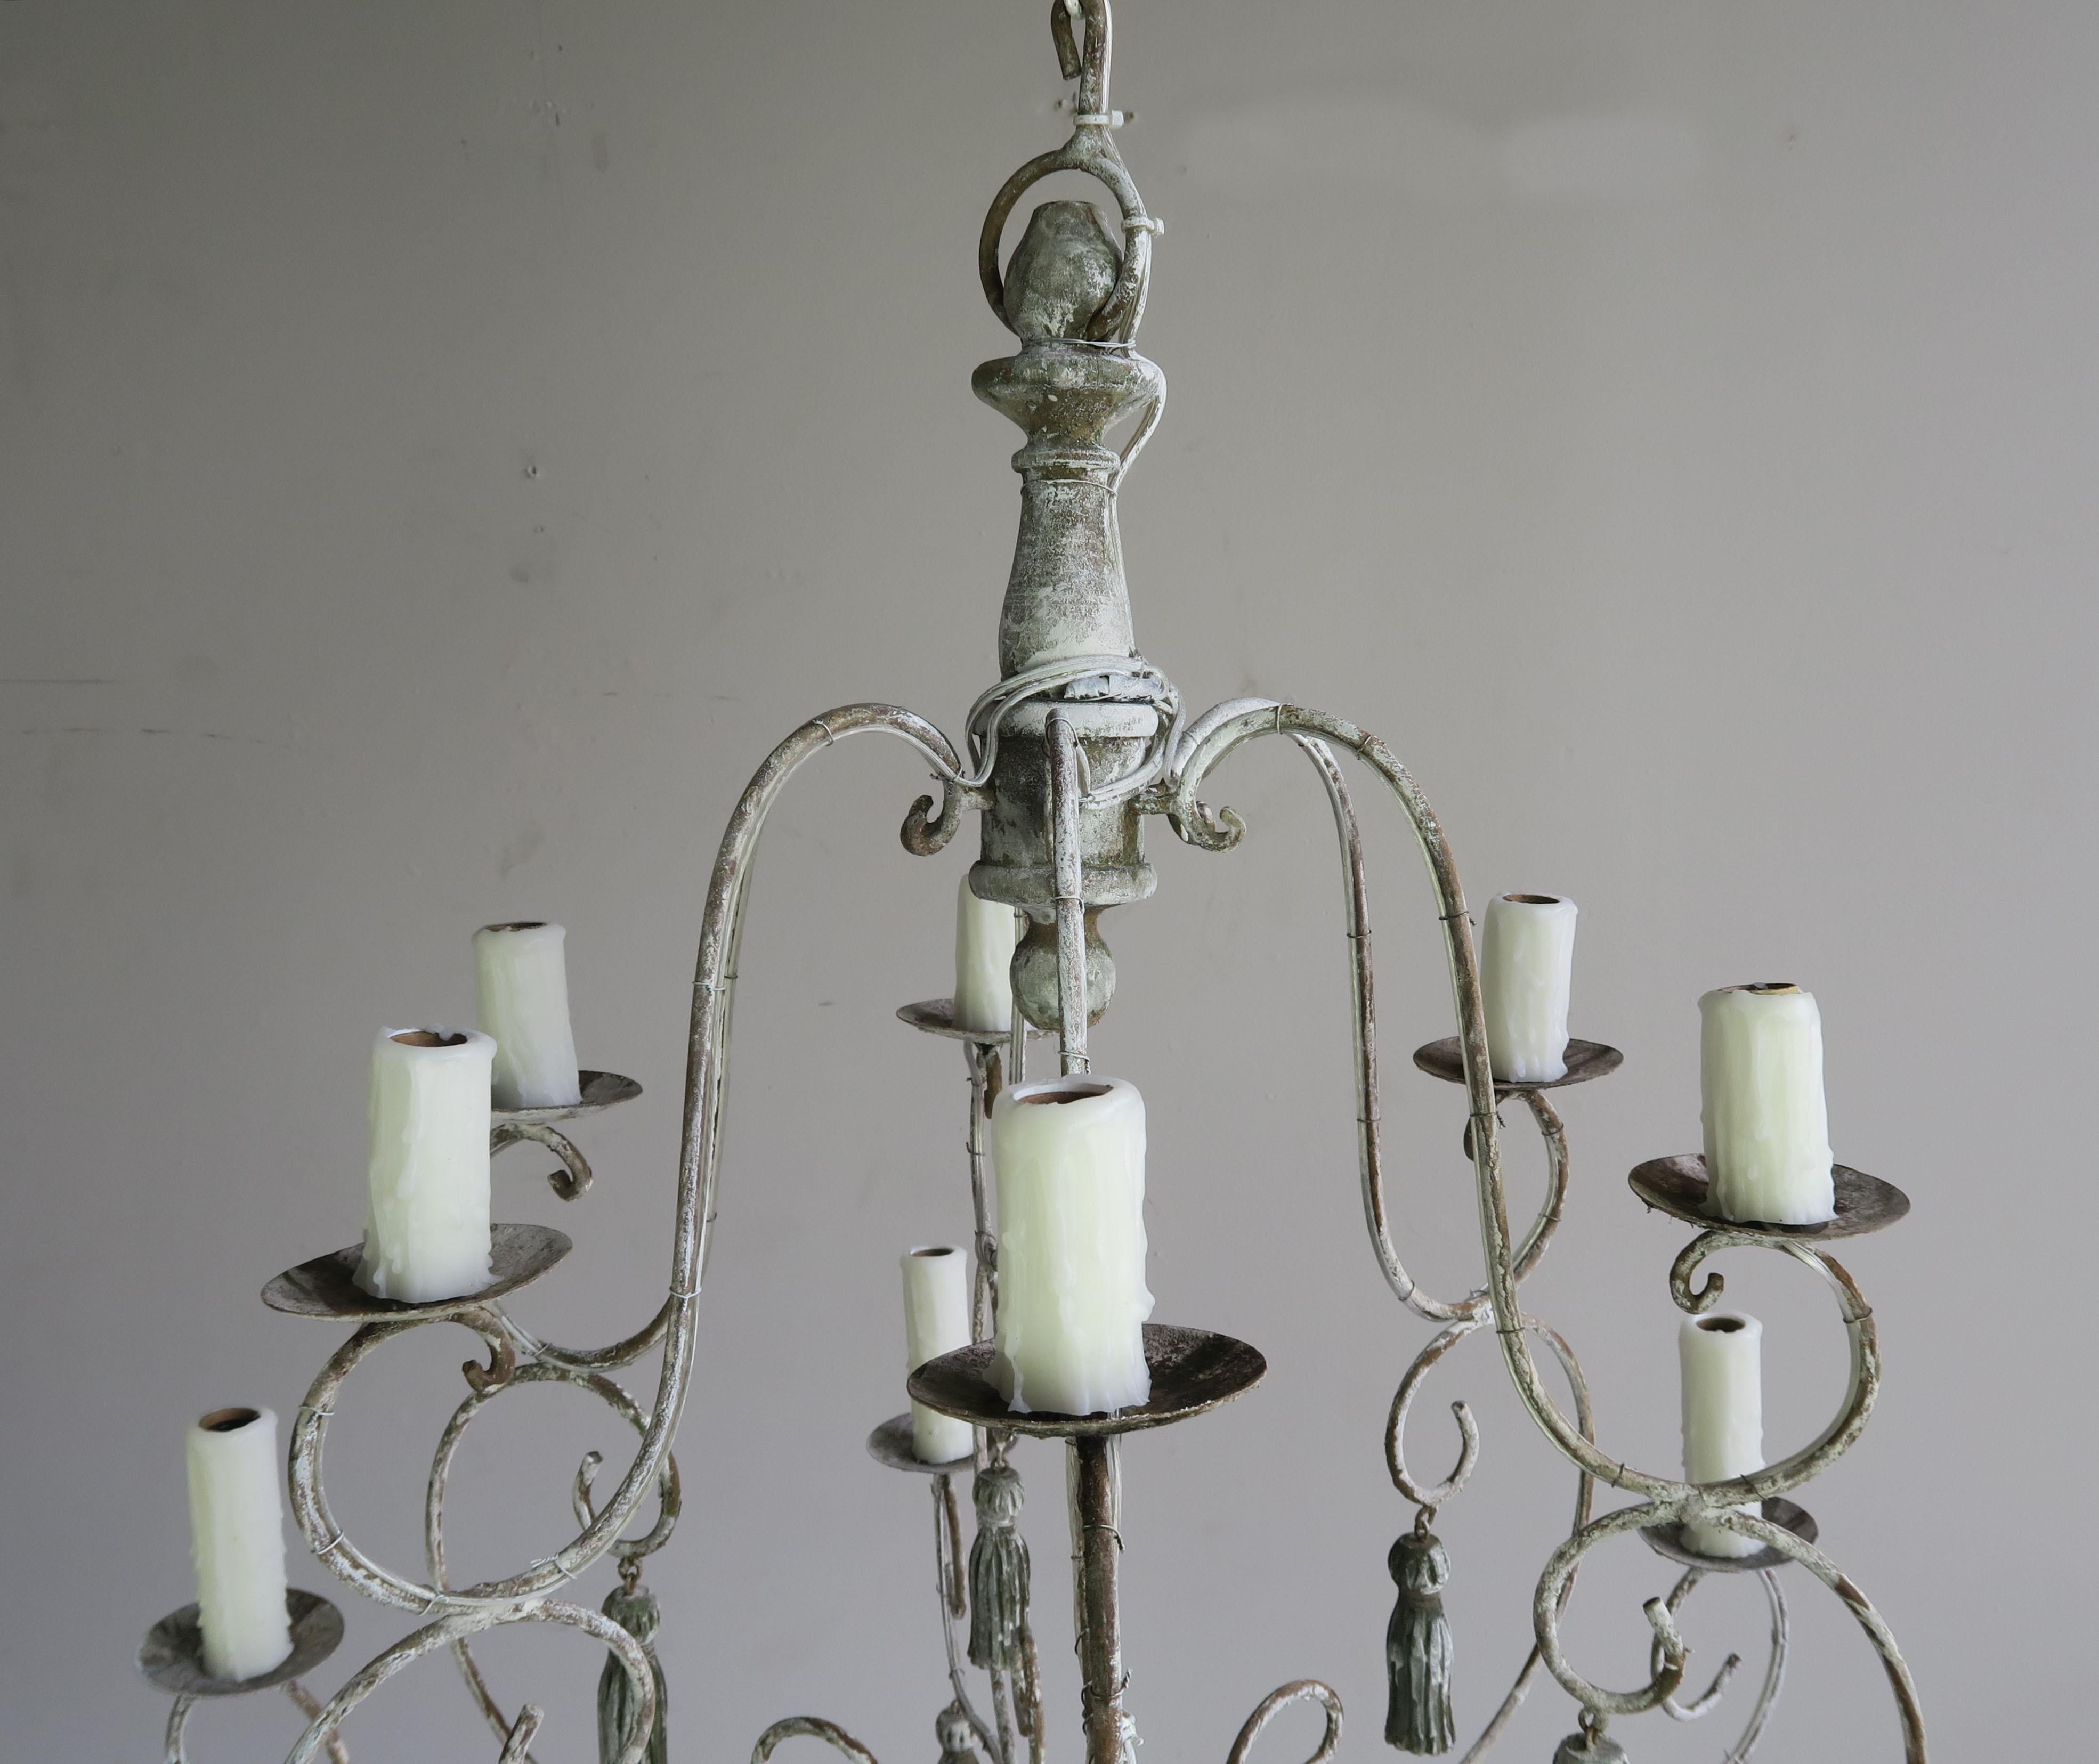 Iron Twelve-Light French Painted Chandelier with Tassels